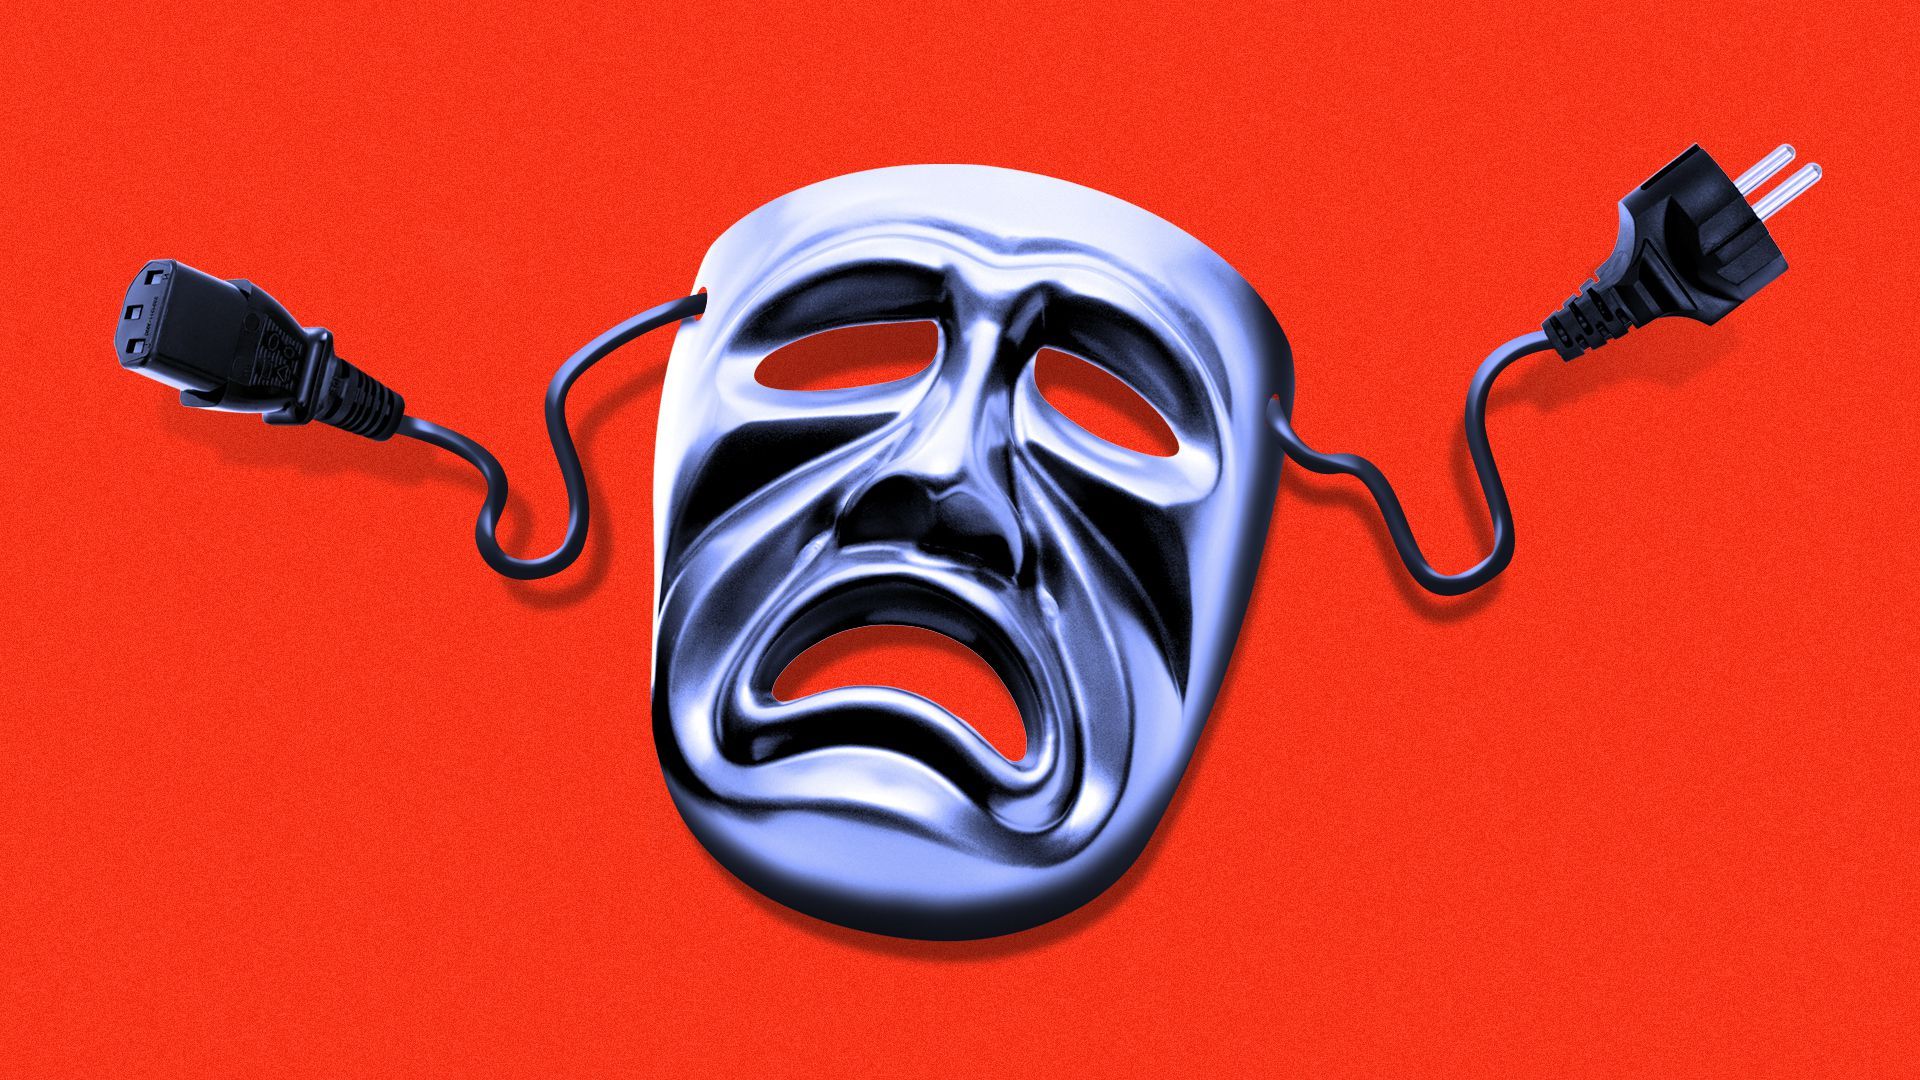 Illustration of a tragedy mask with electrical cords for laces